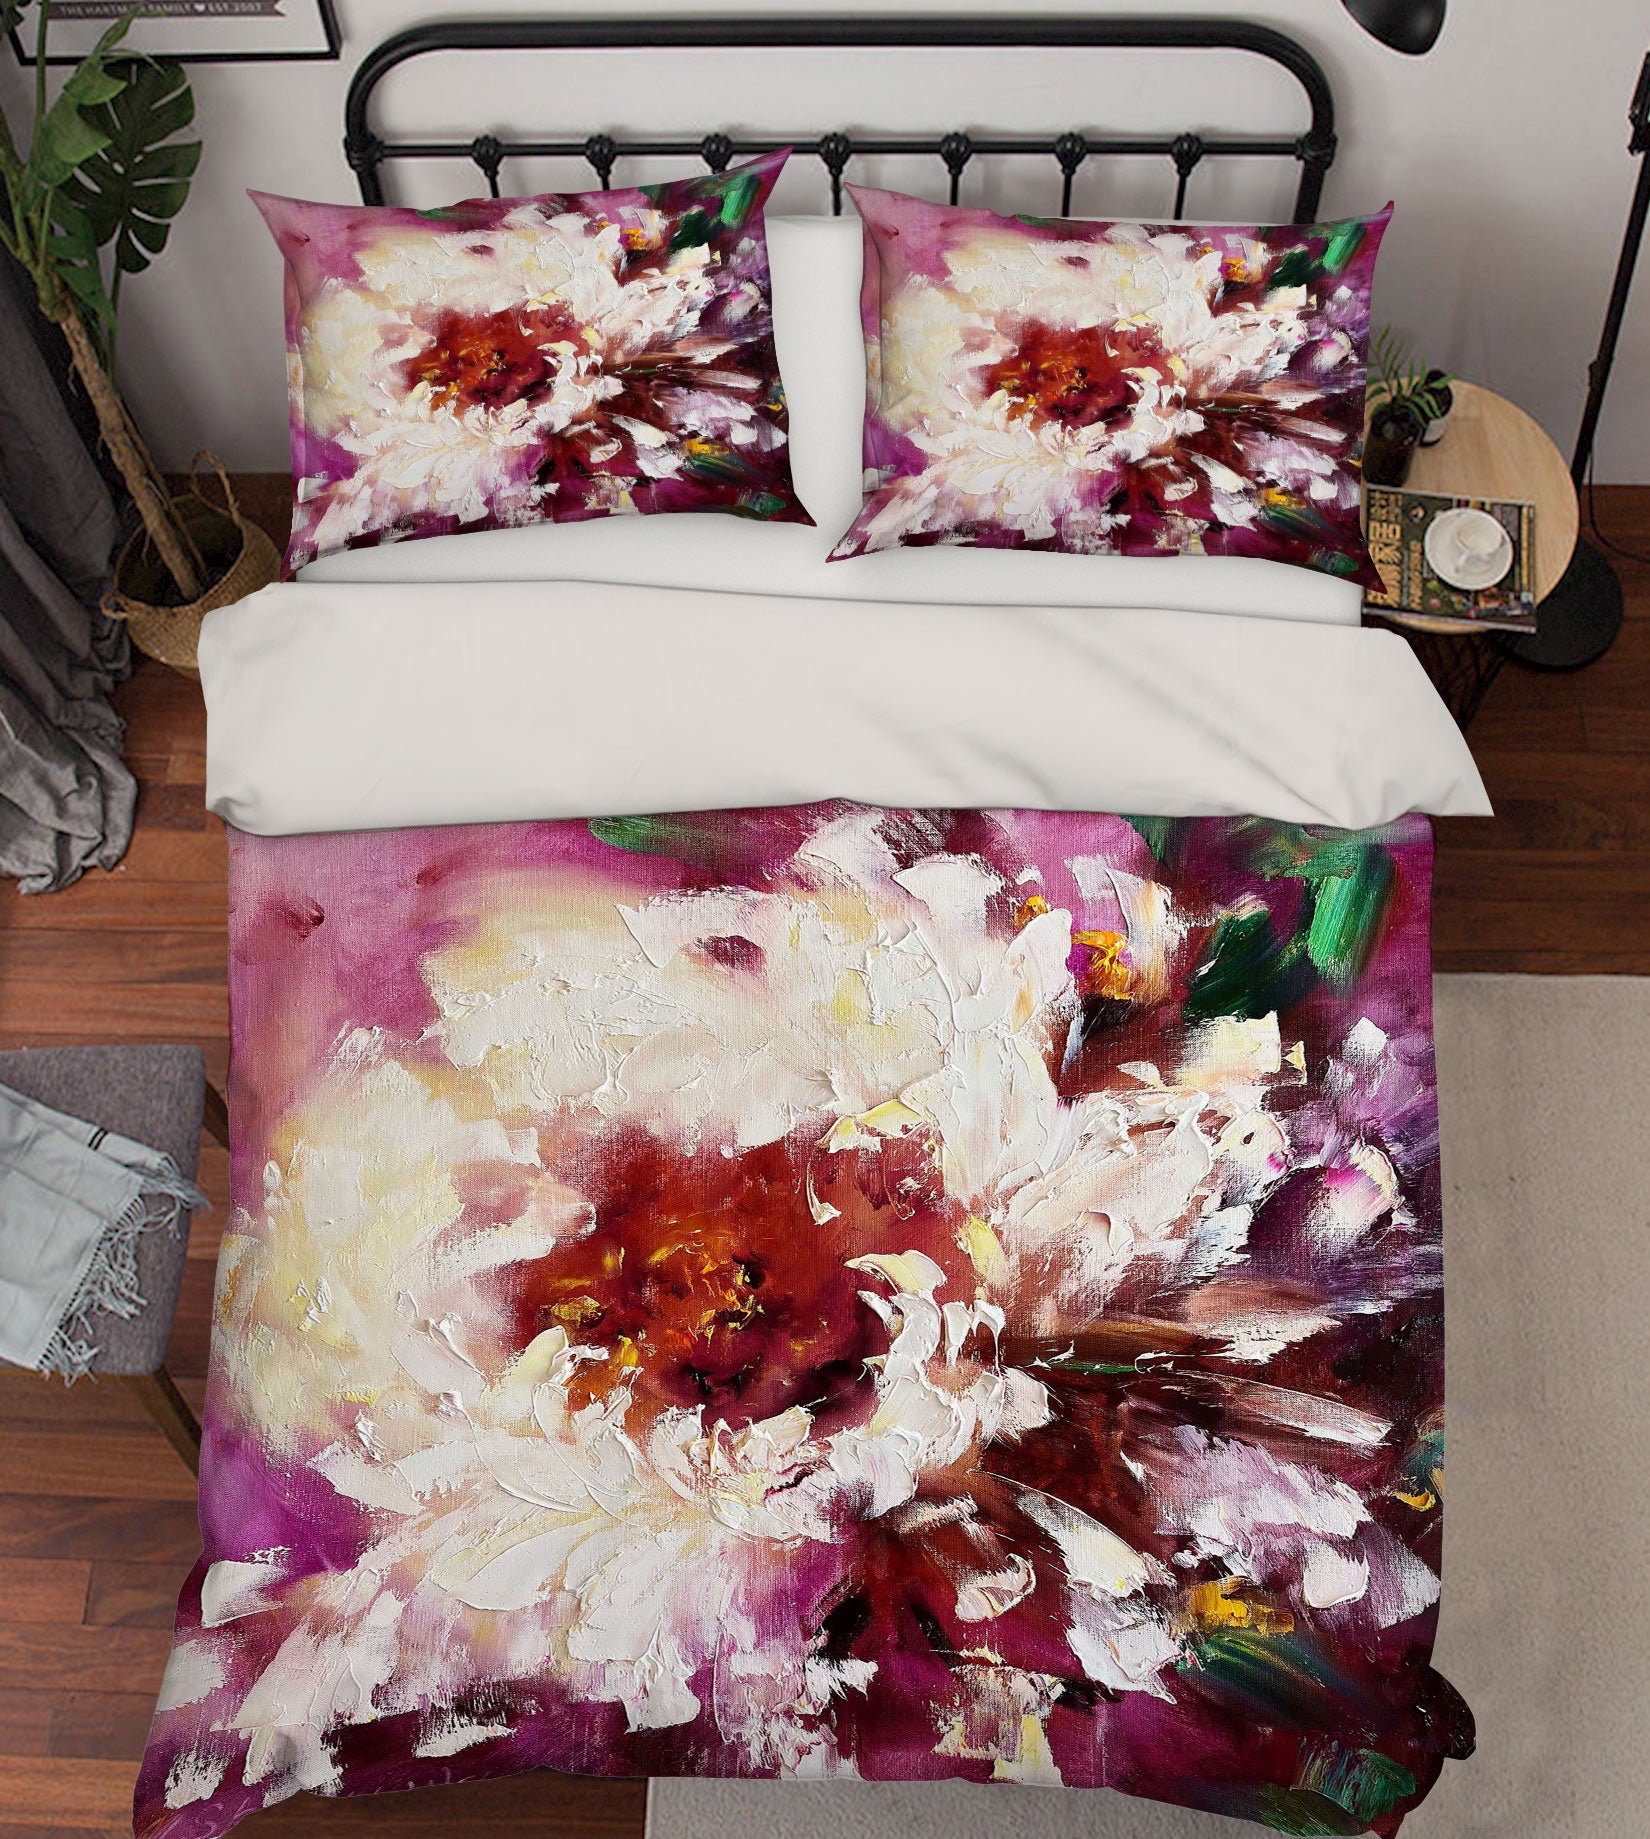 3D Painted Flowers 434 Skromova Marina Bedding Bed Pillowcases Quilt